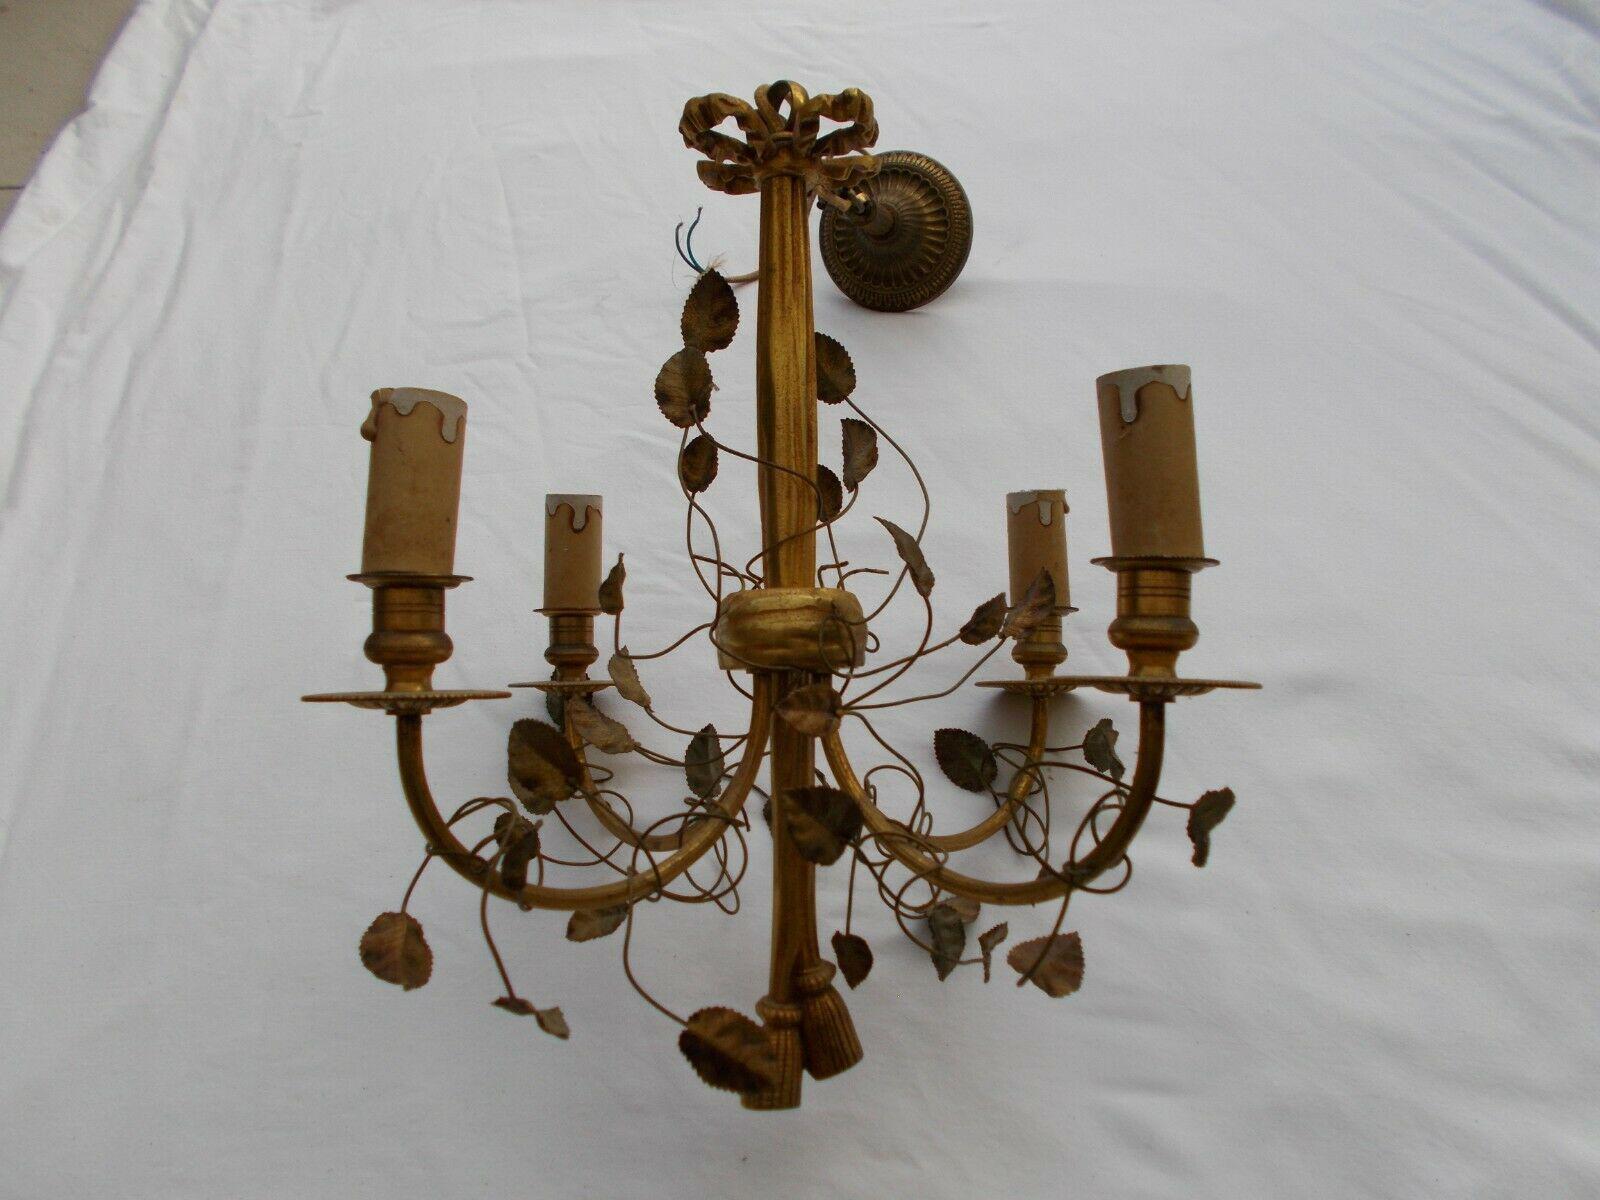 c1910 French Antique Louis XVI Bronze Floral Petals and Vines Chandelier. Style of Maison Jansen. 4 light. Purchased on a buying trip to Paris.